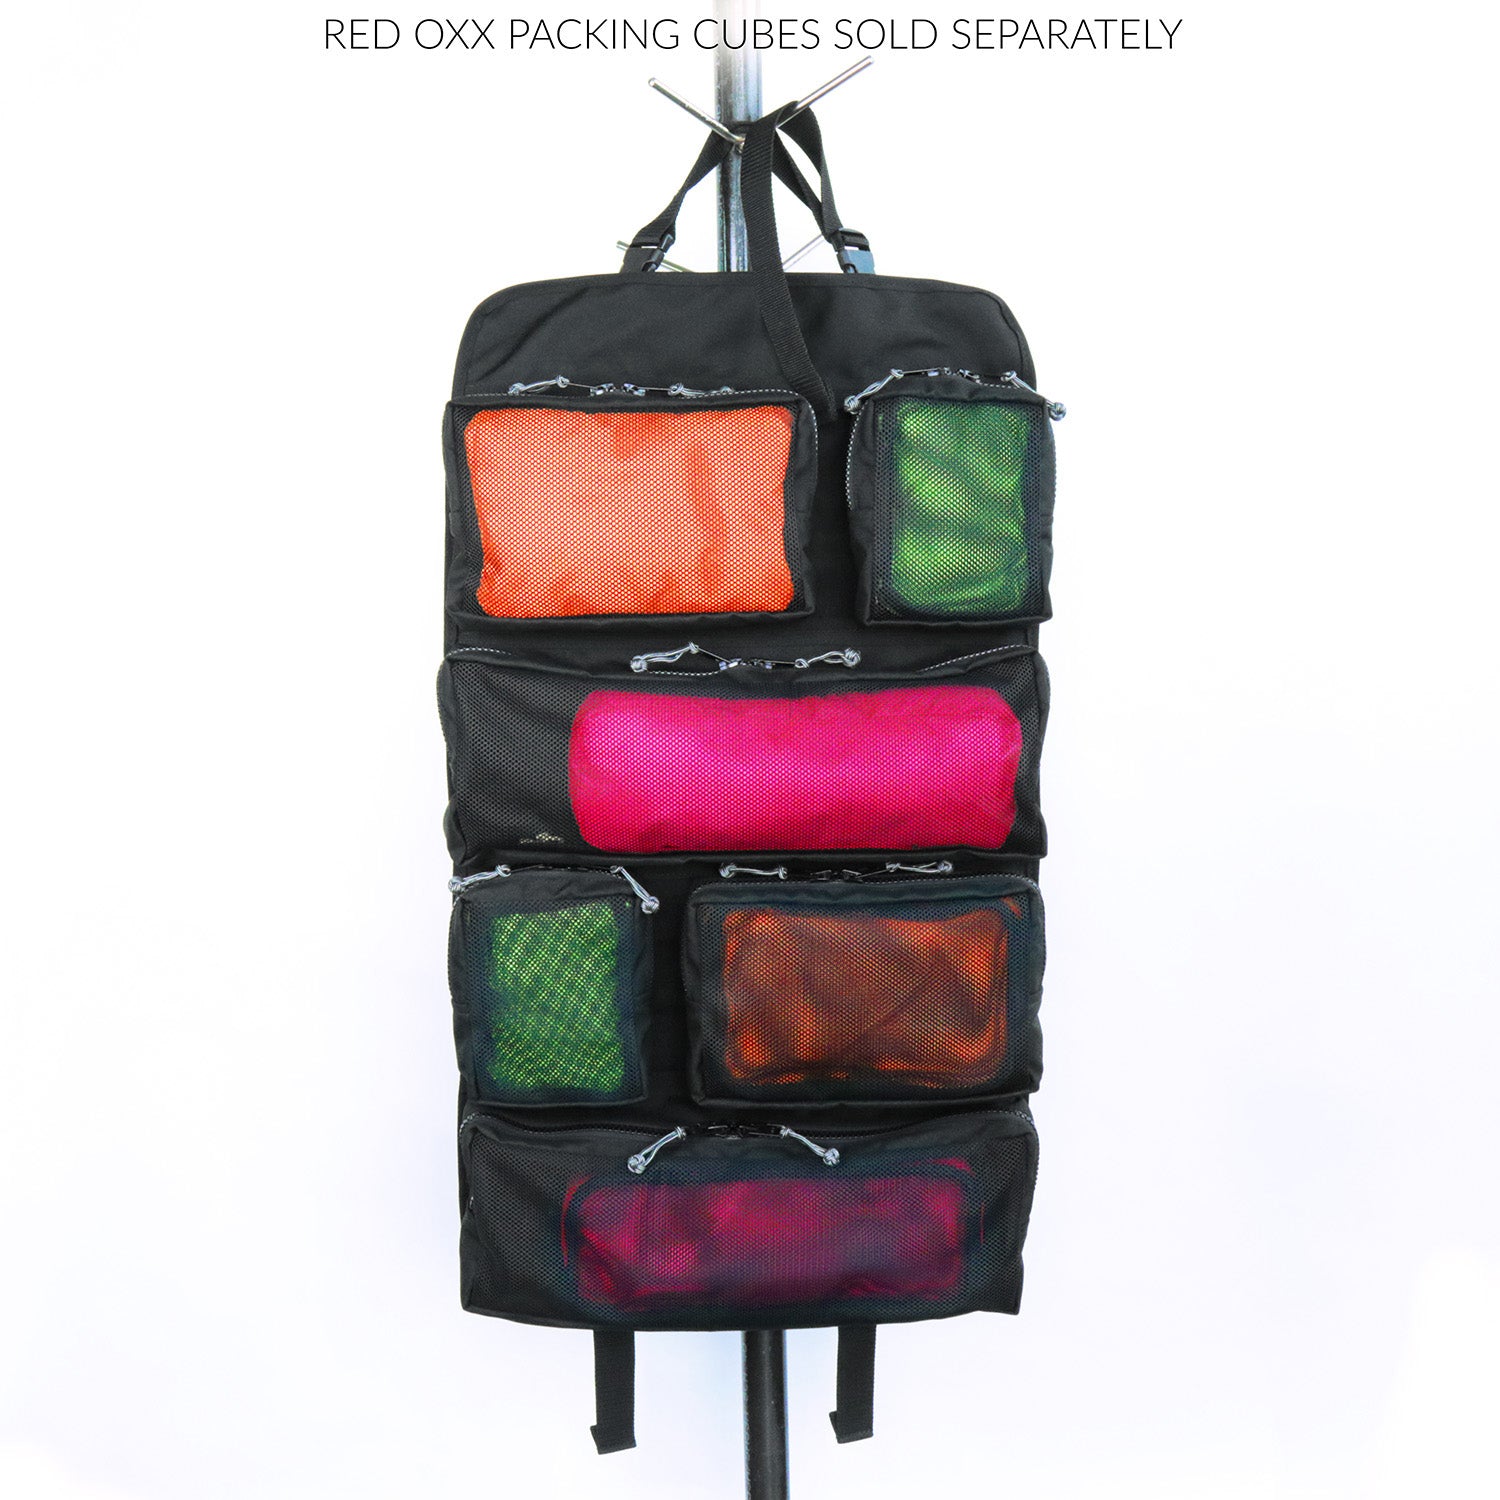 Tool roll up open featuring Red Oxx packing cubes sold separately. 